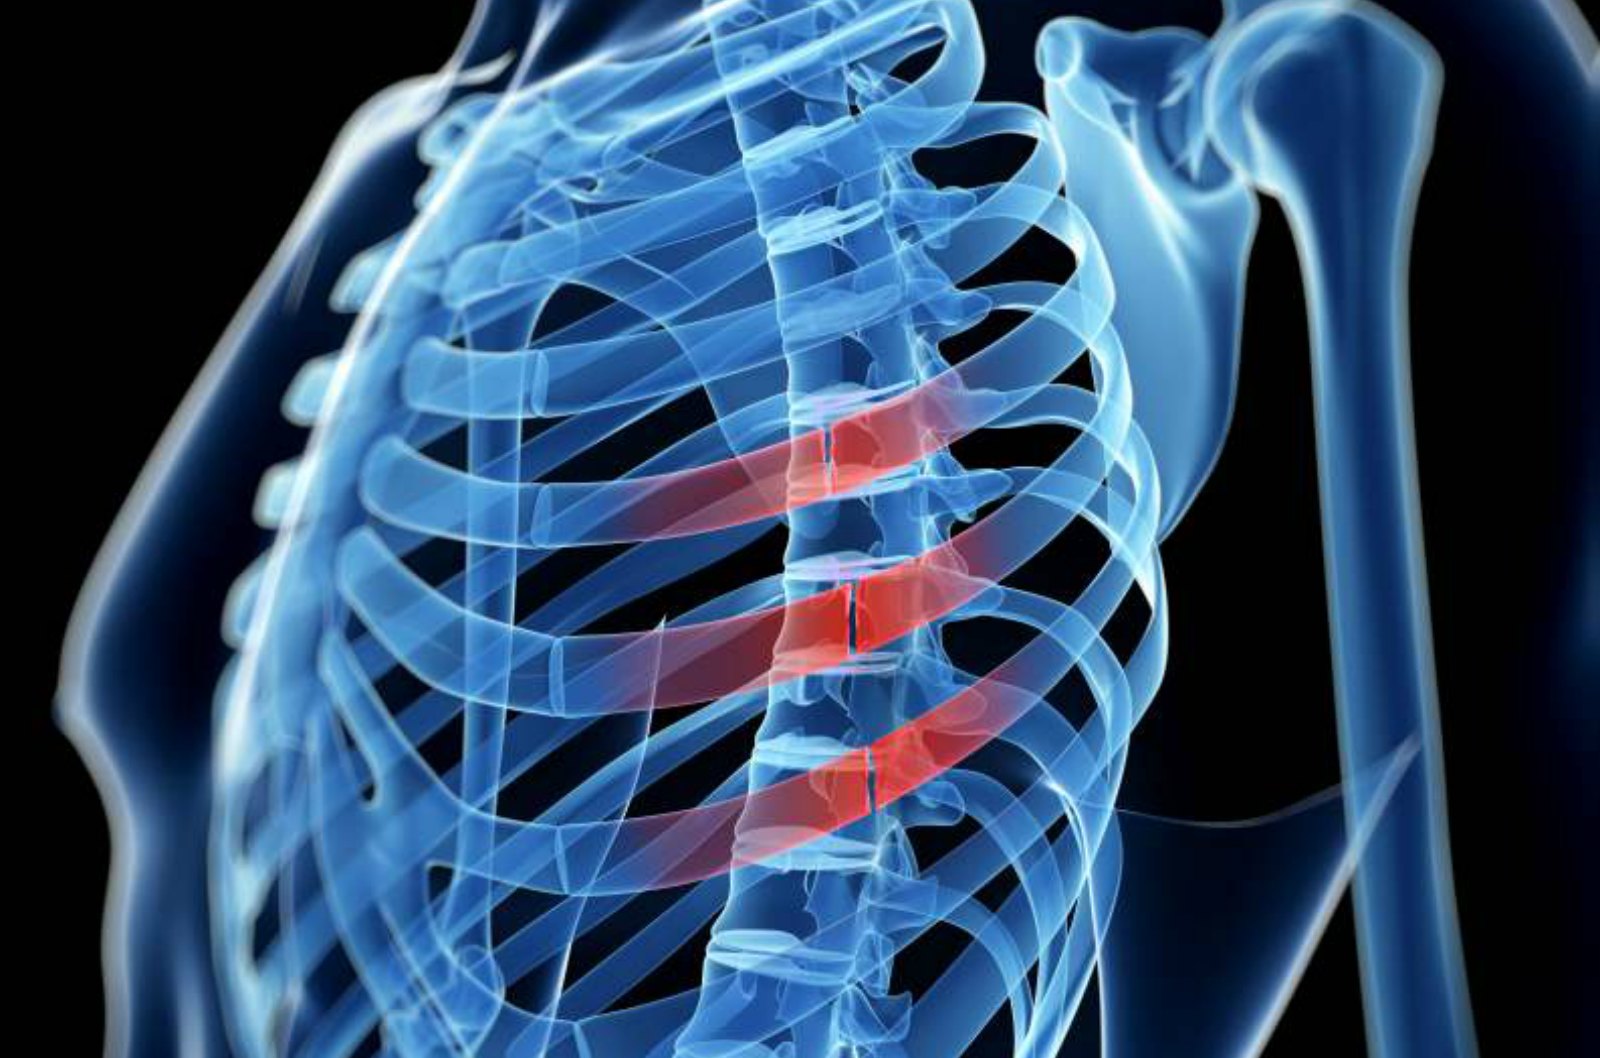 U-plate Eases the Pain of Broken Ribs